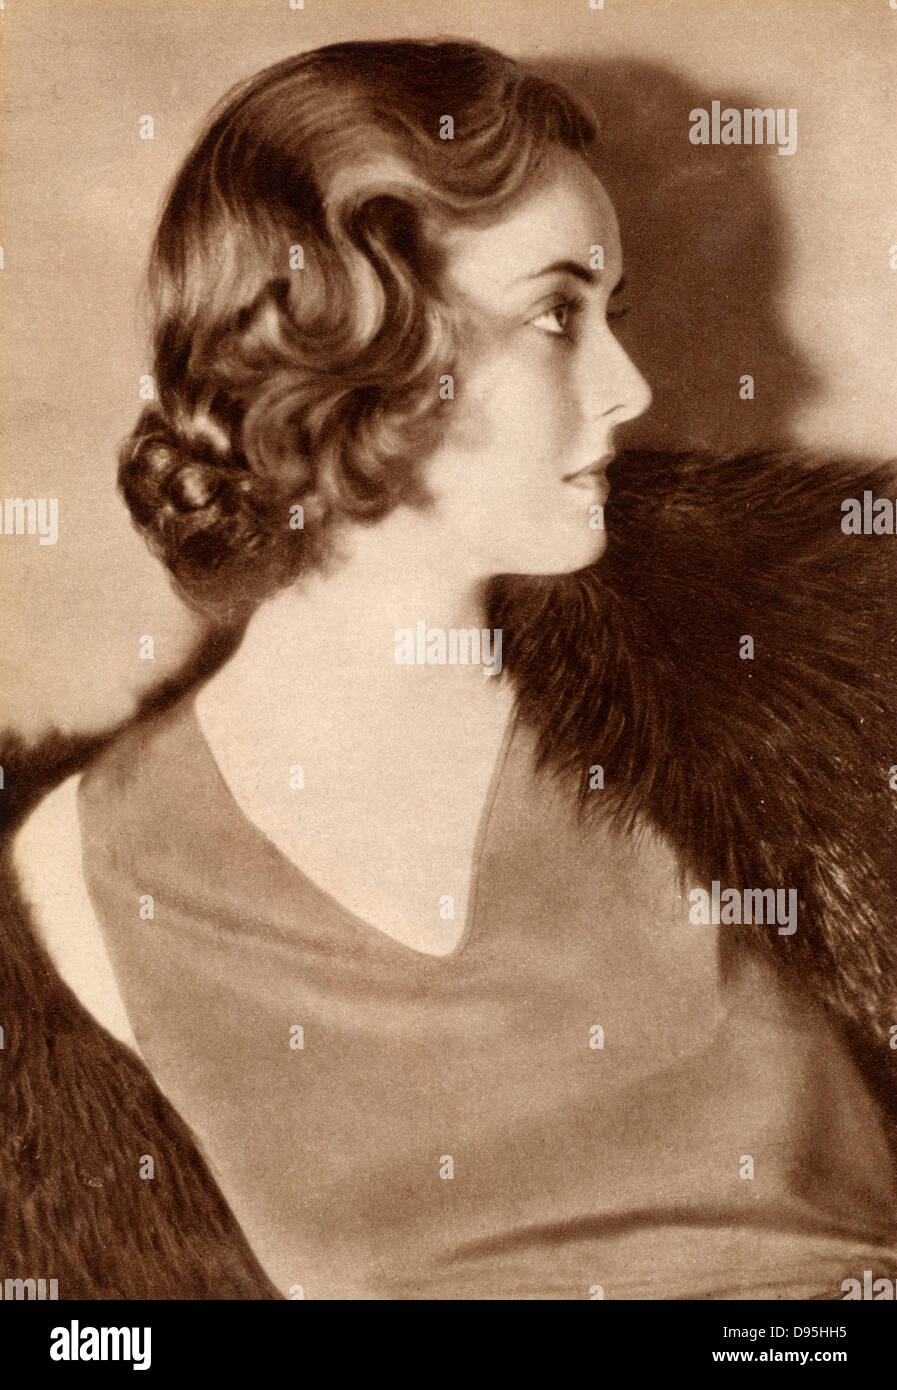 Bette Davis (1908-1989)  American Hollywood actress and film star, as a  young woman. Photograph. Halftone. Stock Photo